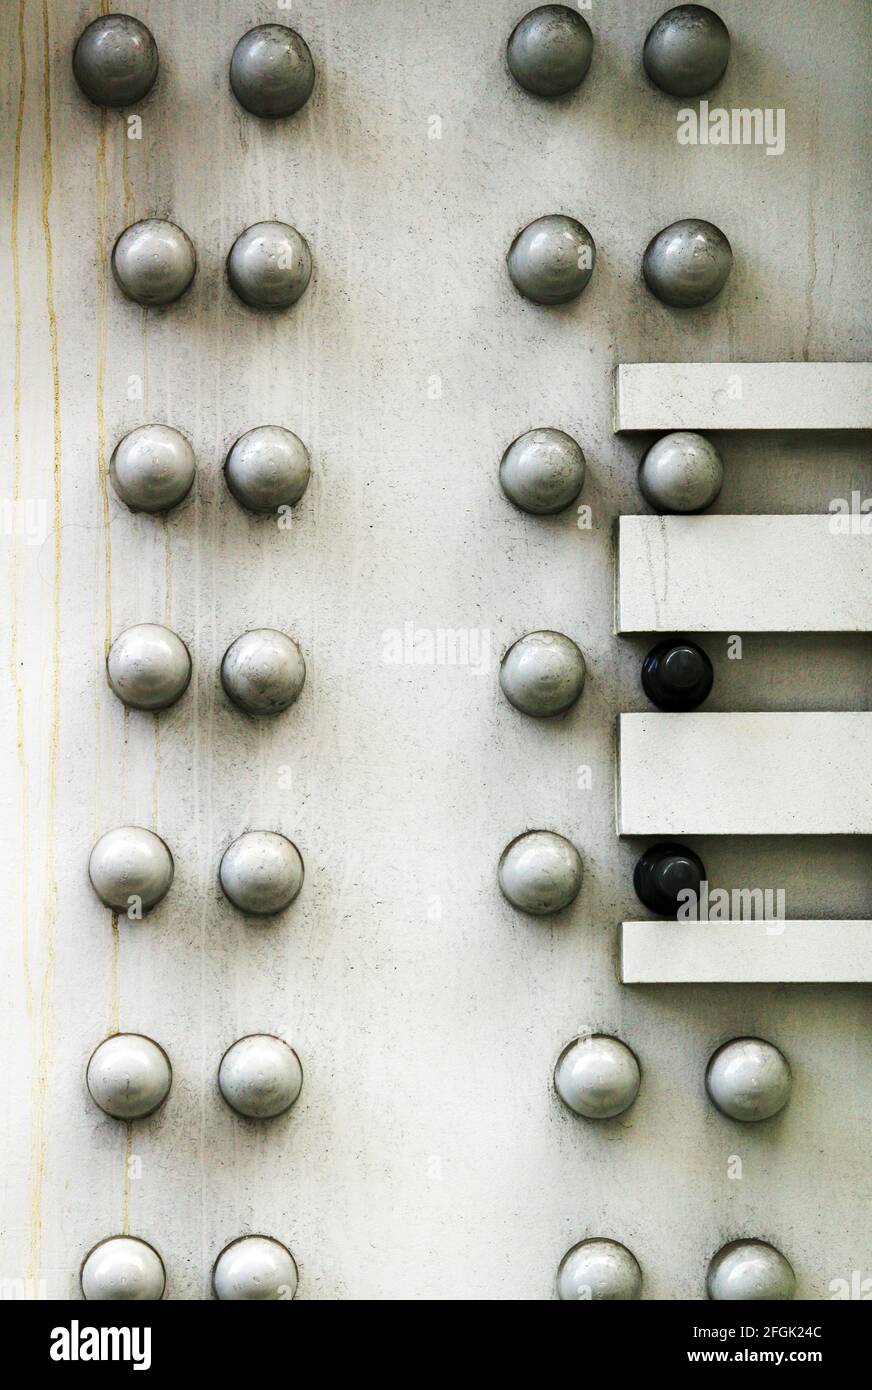 Heavy steel seams secured with rivets Stock Photo